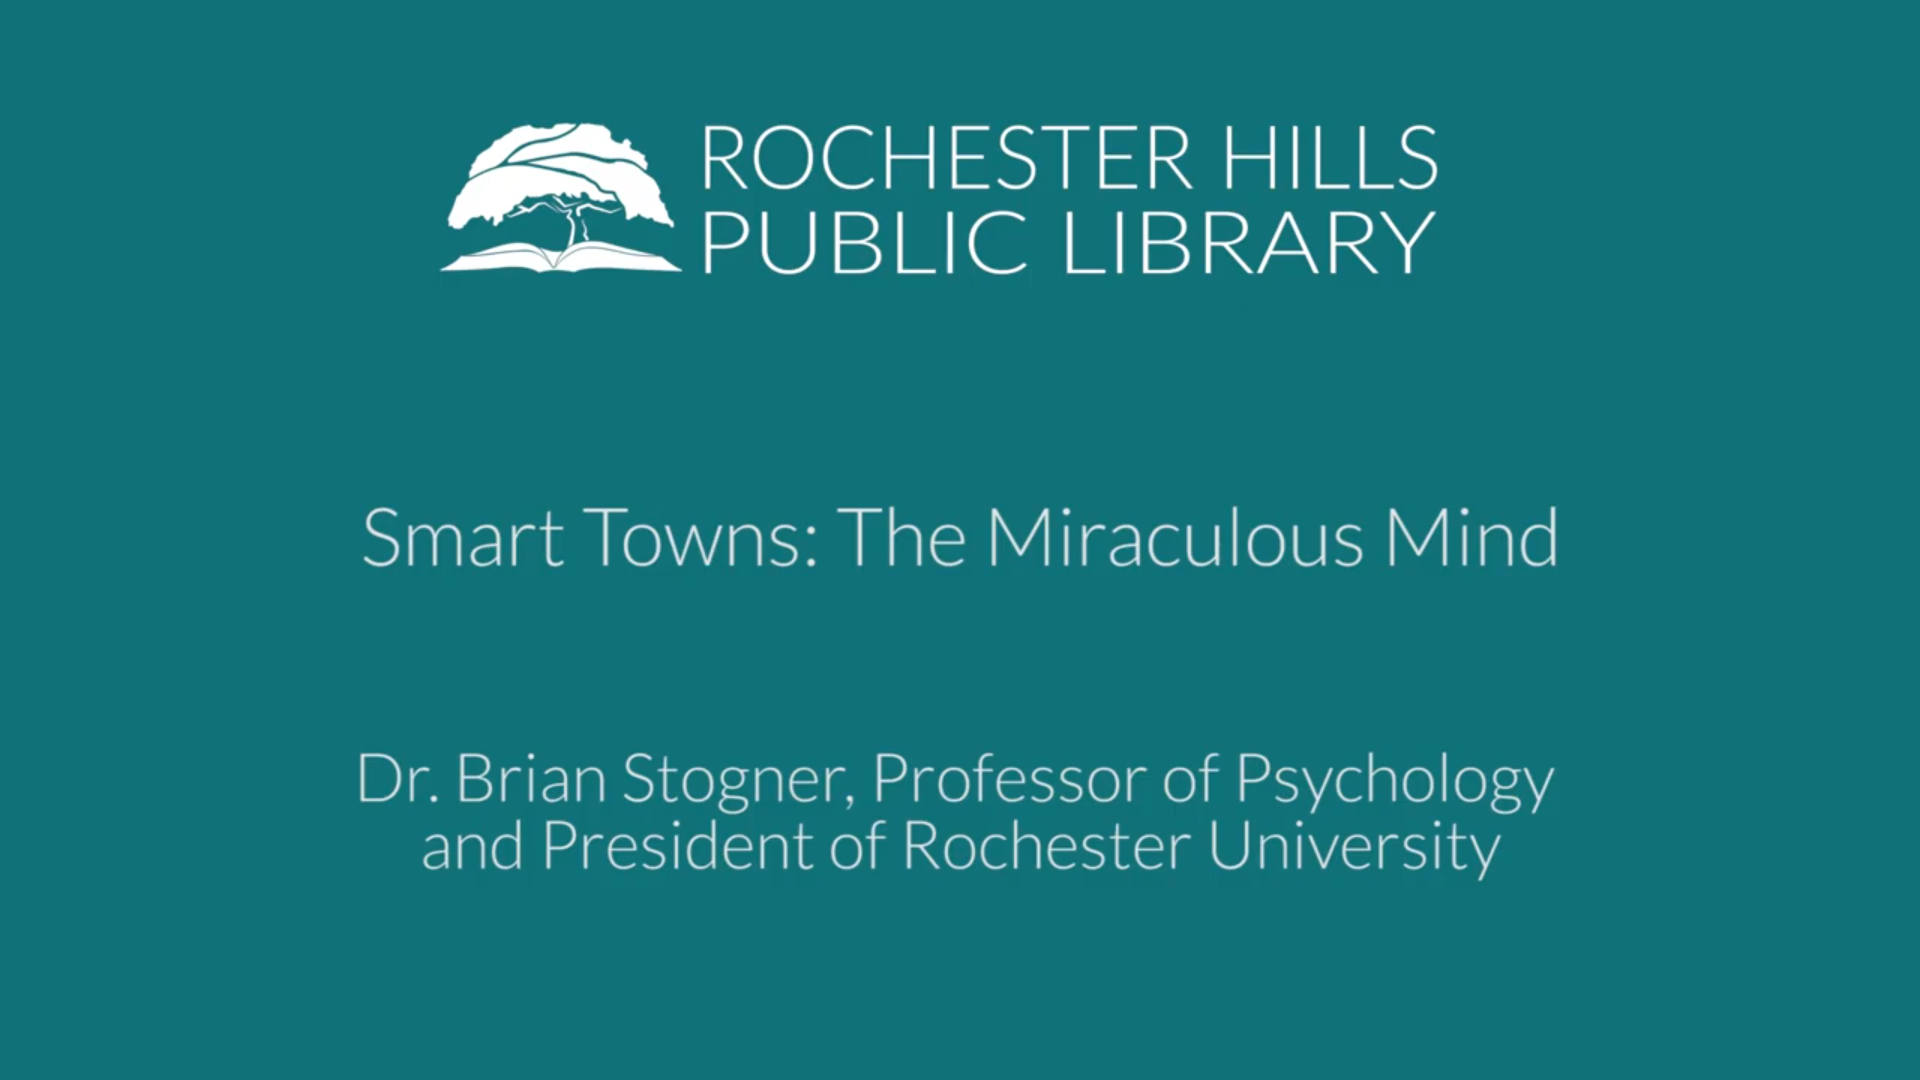 Smart Towns: The Miraculous Mind